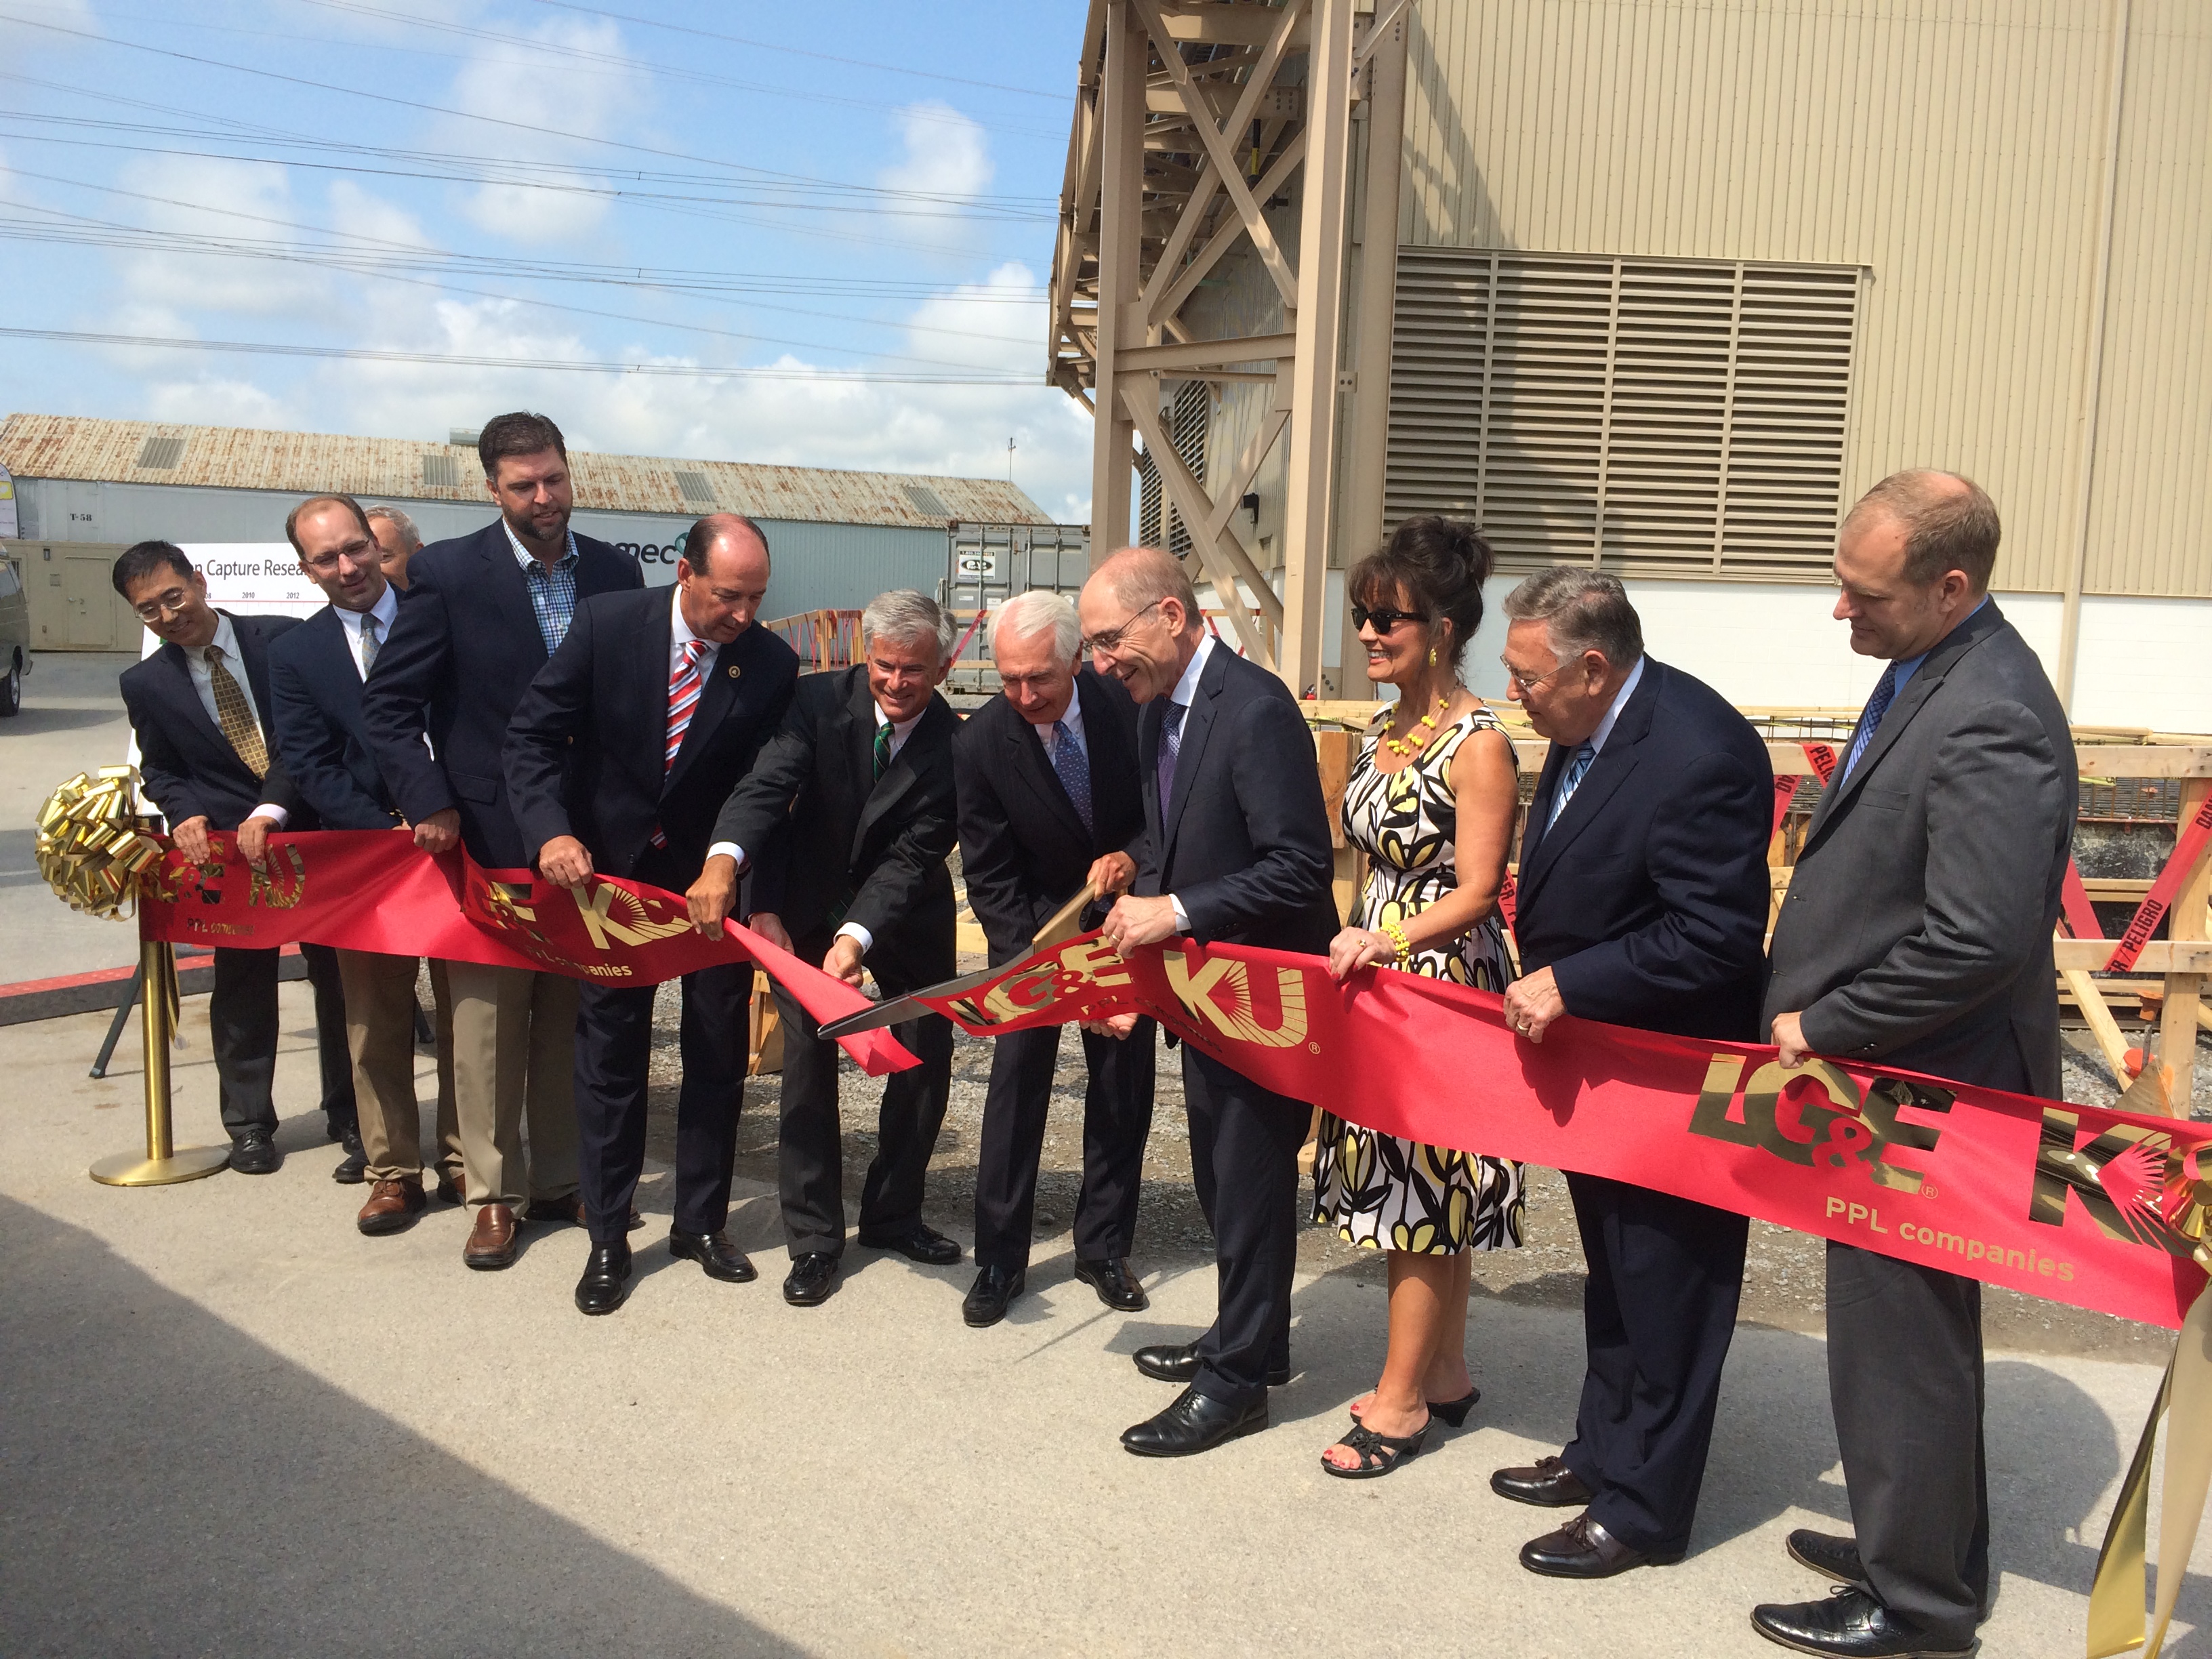 Gov. Steve Beshear (fifth from right) cut the ribbon to begin construction of Kentucky's first megawatt-scale carbon capture pilot unit at an operating power plant located at Kentucky Utilities Company’s E.W. Brown Generating Station, near Harrodsburg.